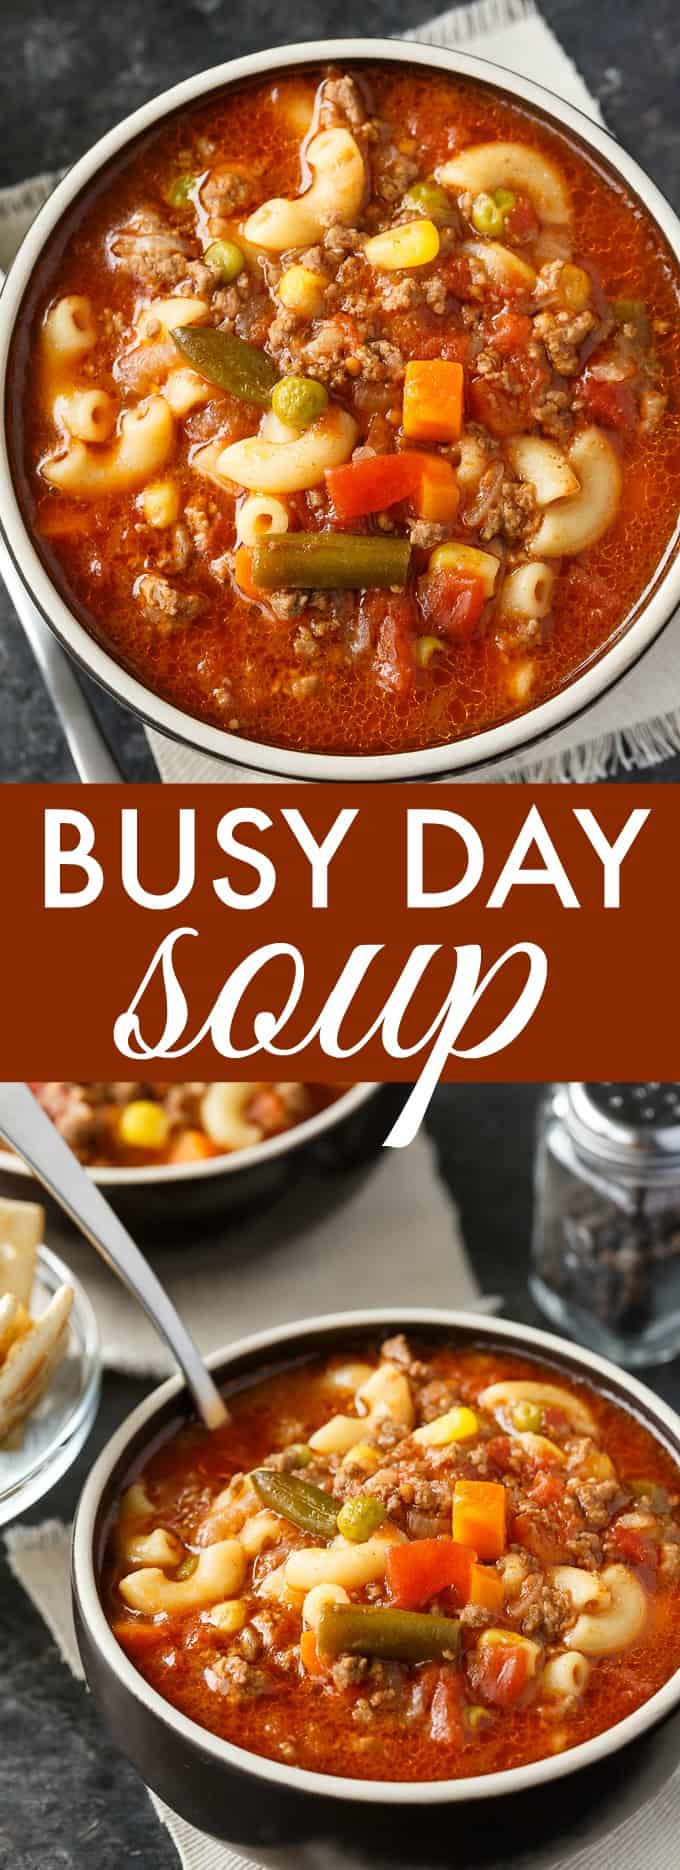 busy day soup recipe